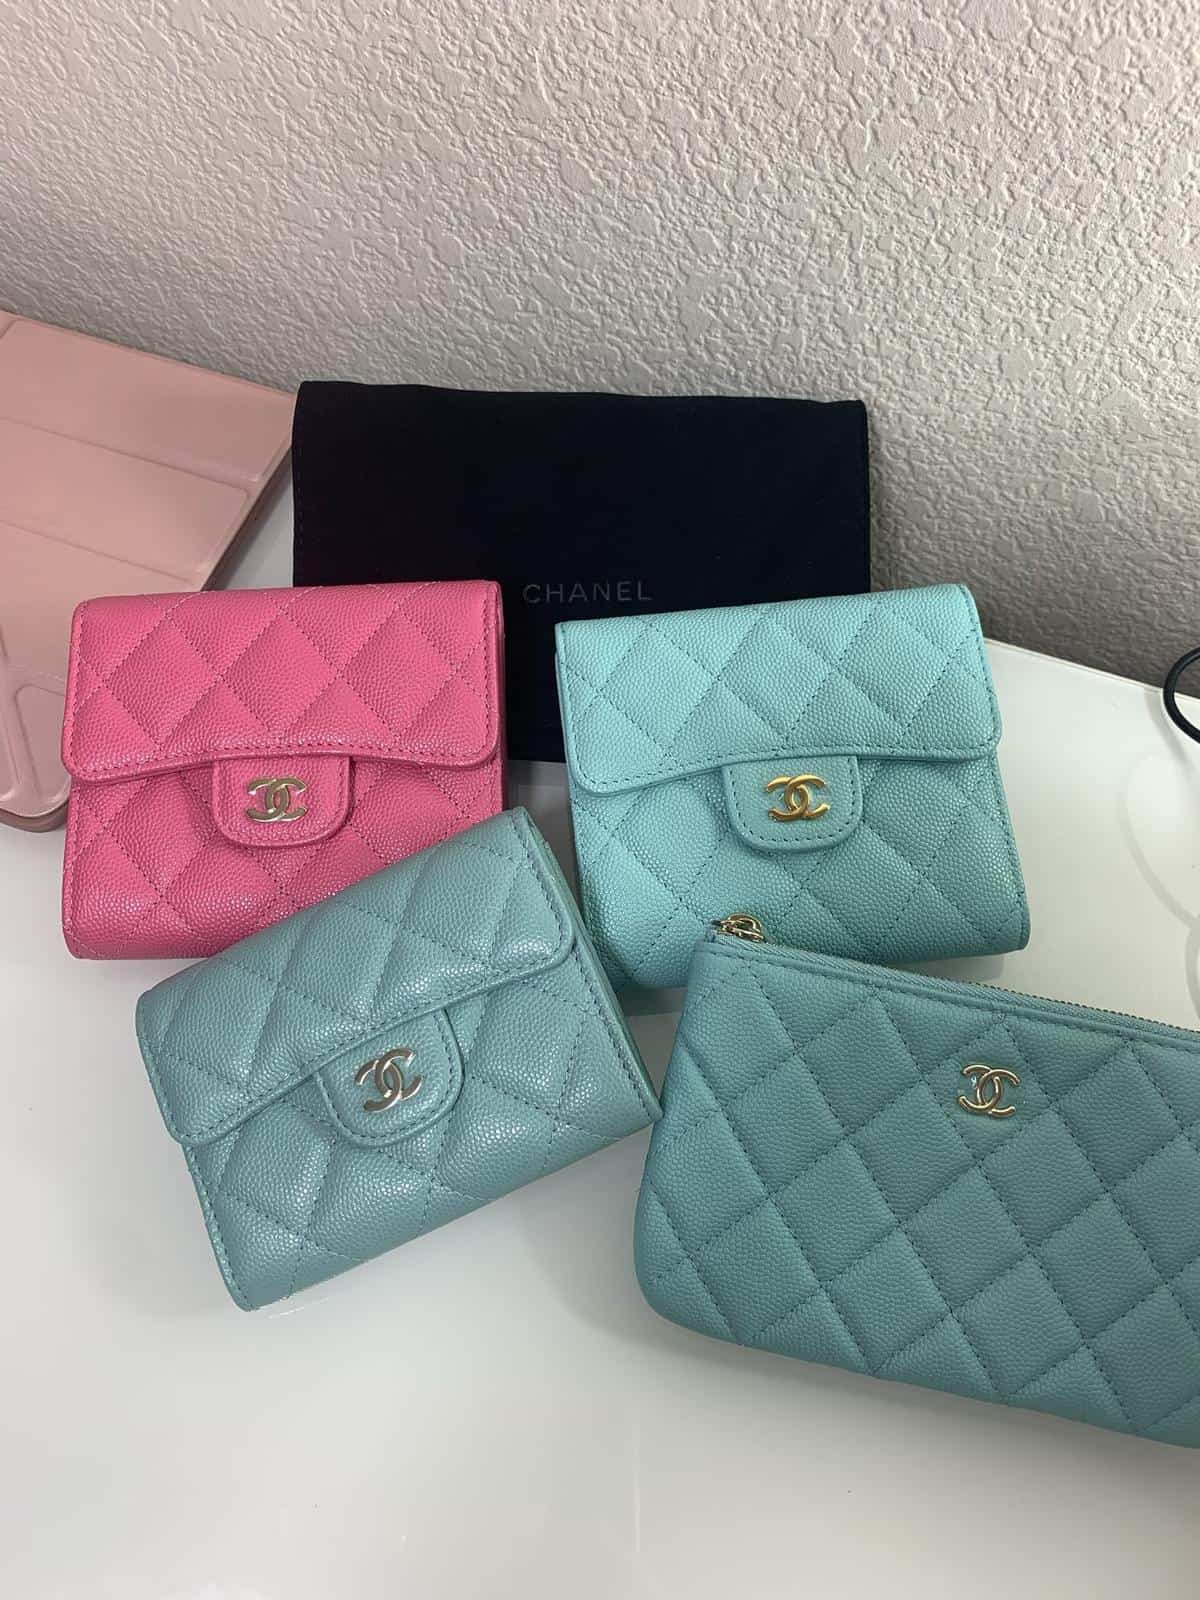 how to see a fake chanel wallet